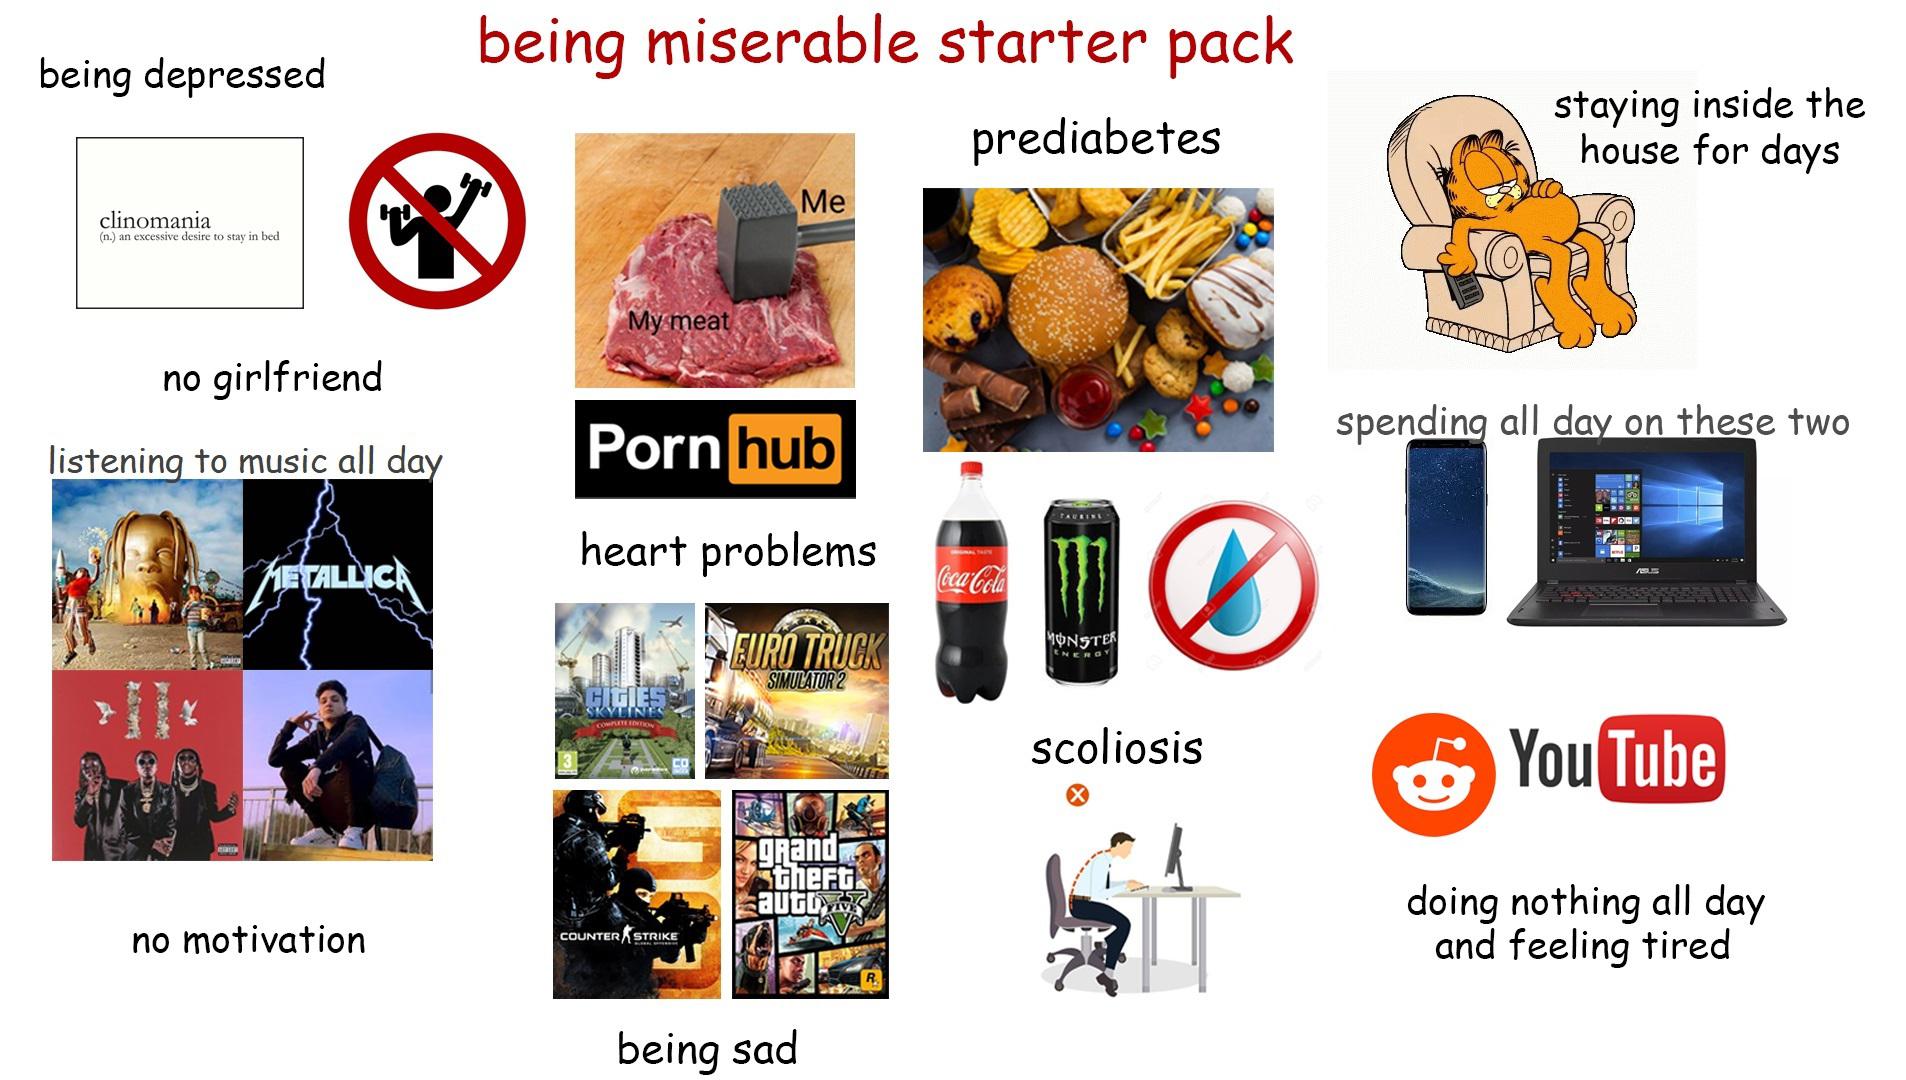 30 Starter Pack Memes That Hit The Nail On The Head - Funny Gallery